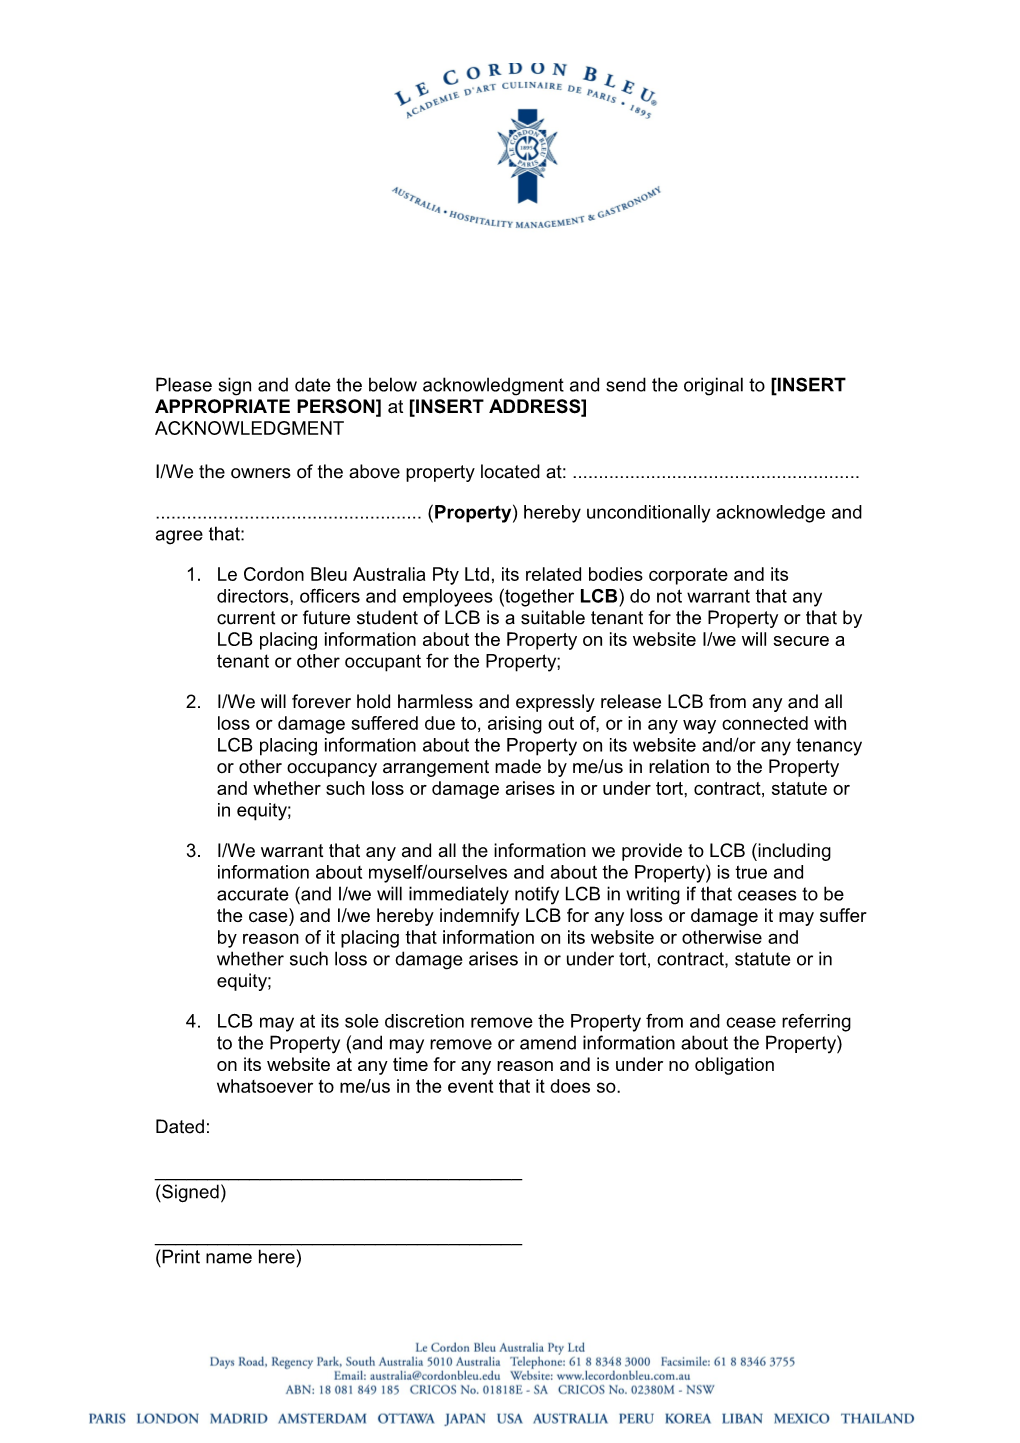 Private Rental Property Form